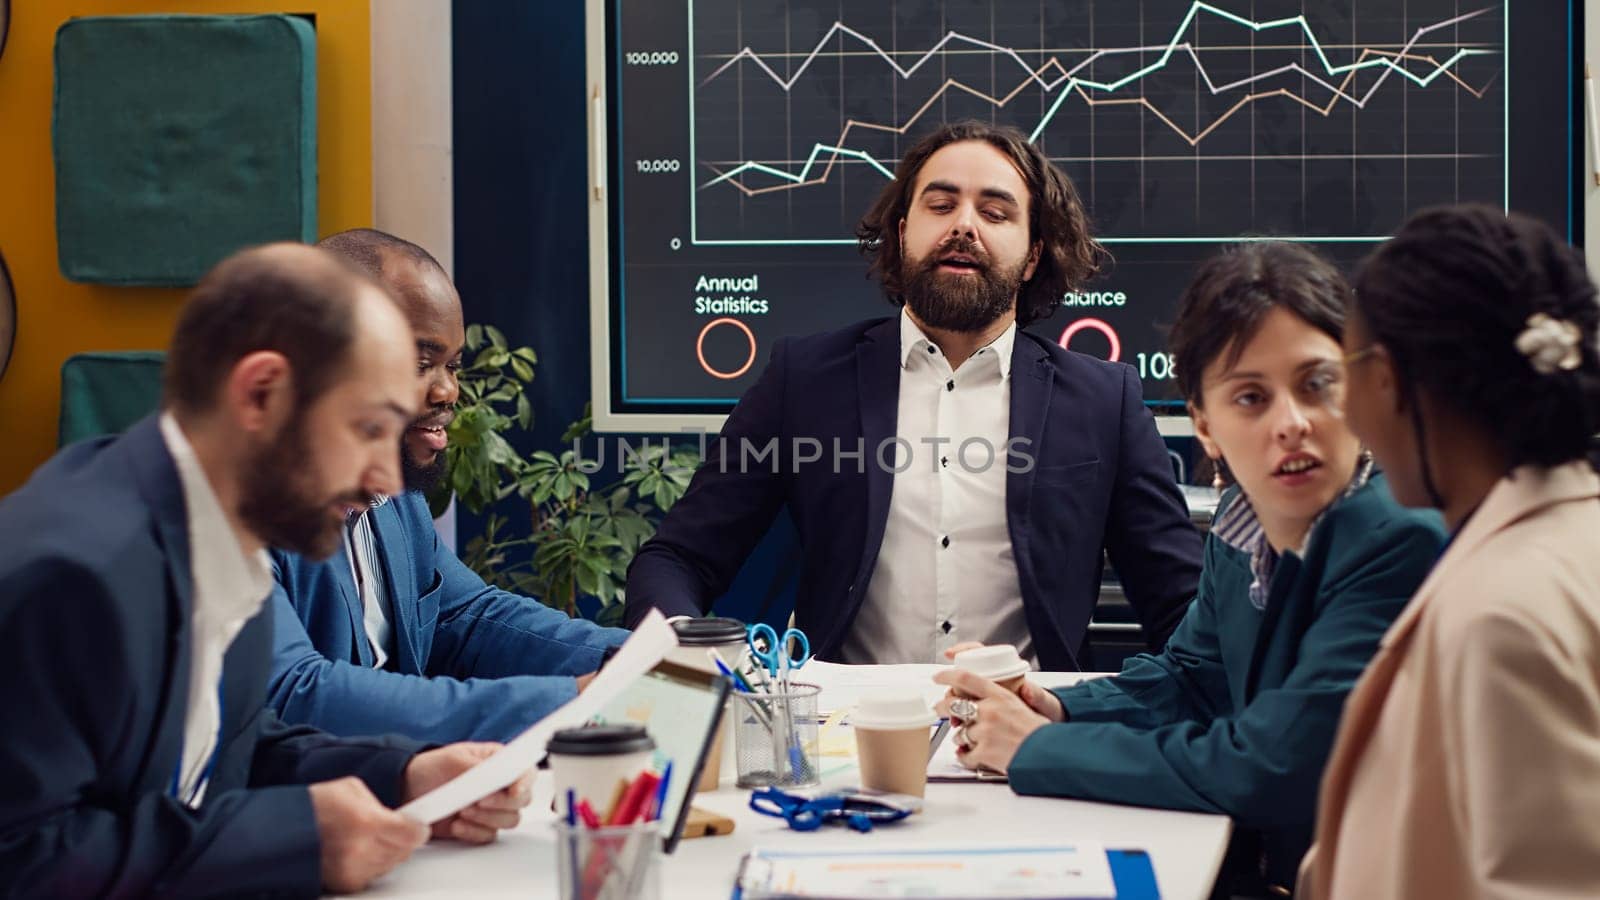 Management consultant inviting employees to a corporate briefing meeting, addressing conflicts or concerns among team members before starting important project. Organizational growth. Camera A.